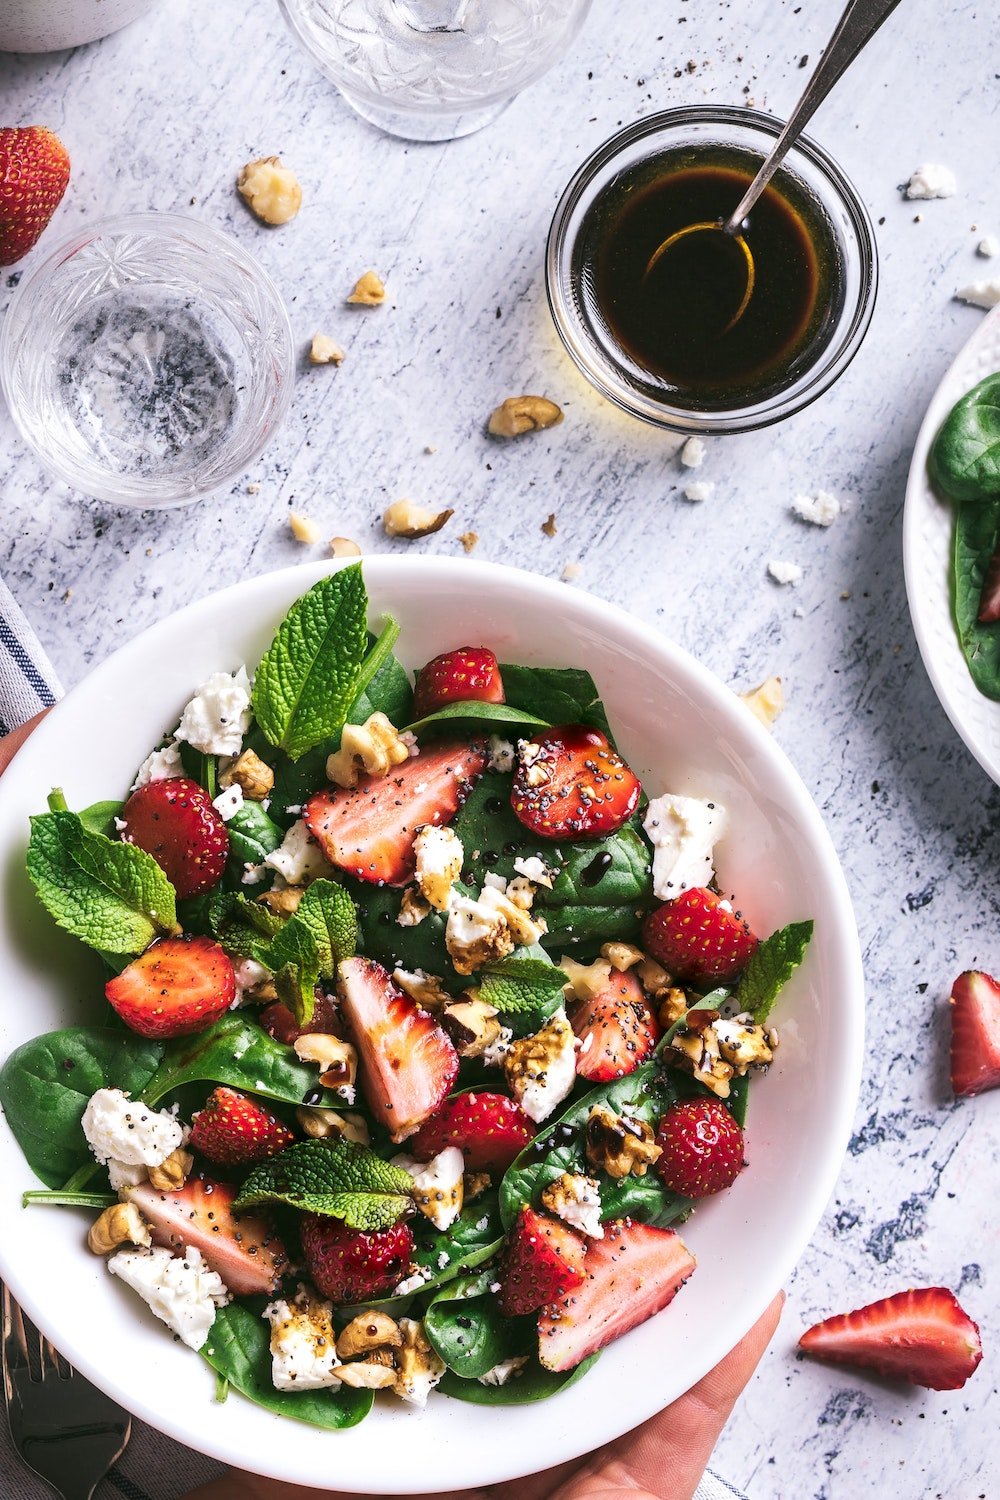 Summer Salad w/ Strawberries Mint Goat Cheese & Aged Balsamic Vinegar - Feast Italy